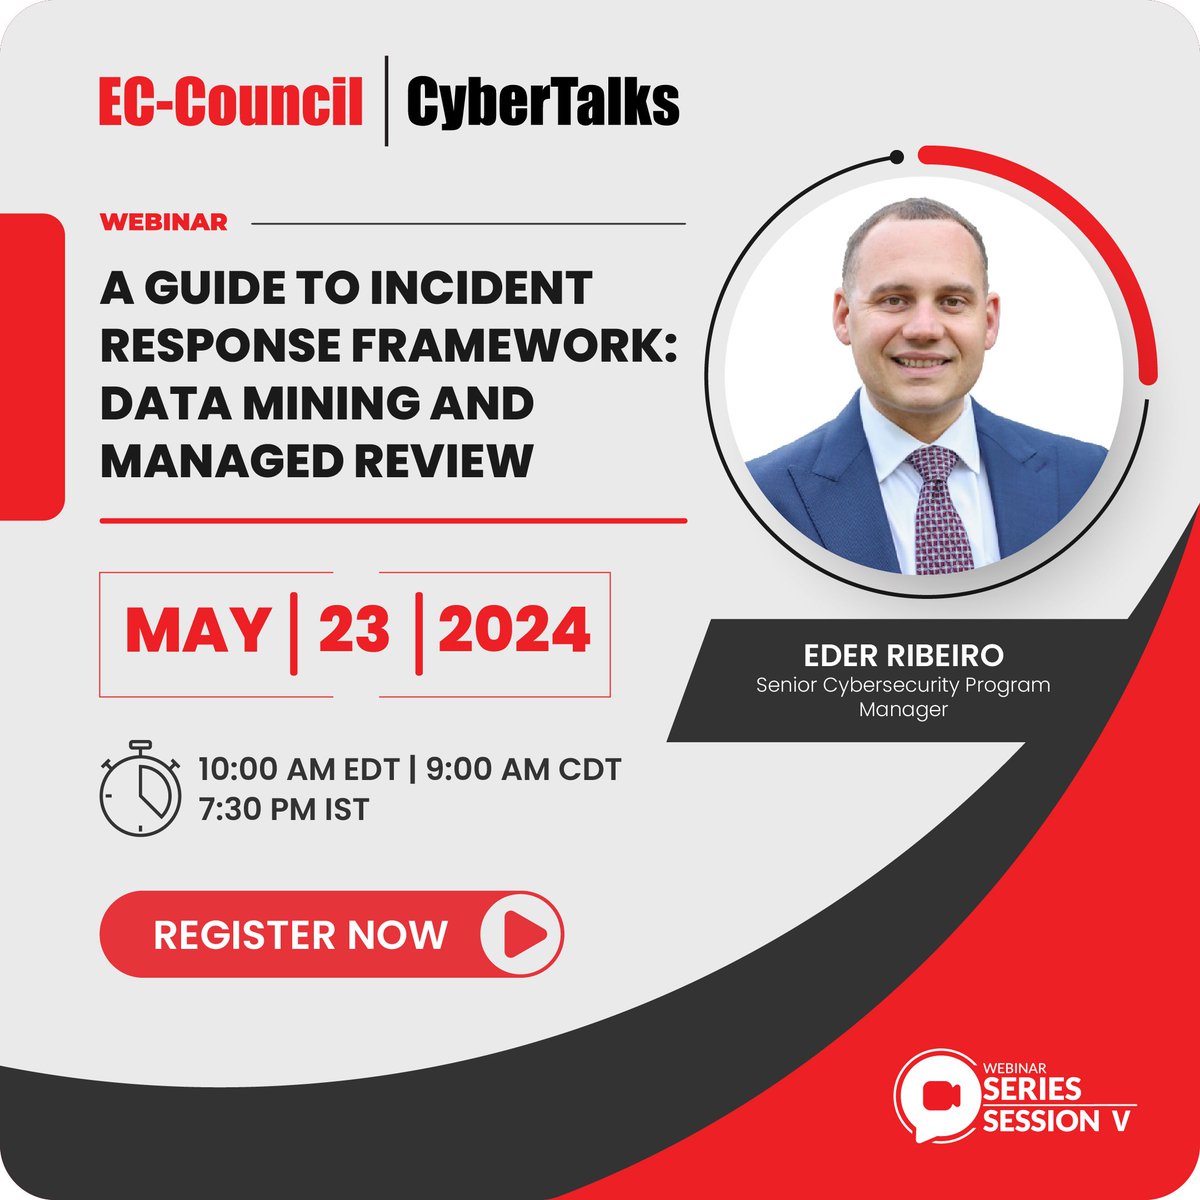 Learn about #DataMining and #ManagedReview in this #Webinar with Eder Ribeiro. Understand their roles in the IR lifecycle, how they work, etc.! 

Register now: buff.ly/4bmDzgF  

#ECCouncil #Cybersecurity #CybersecurityAwareness #ECIH #IncidentResponse #IRPlanning